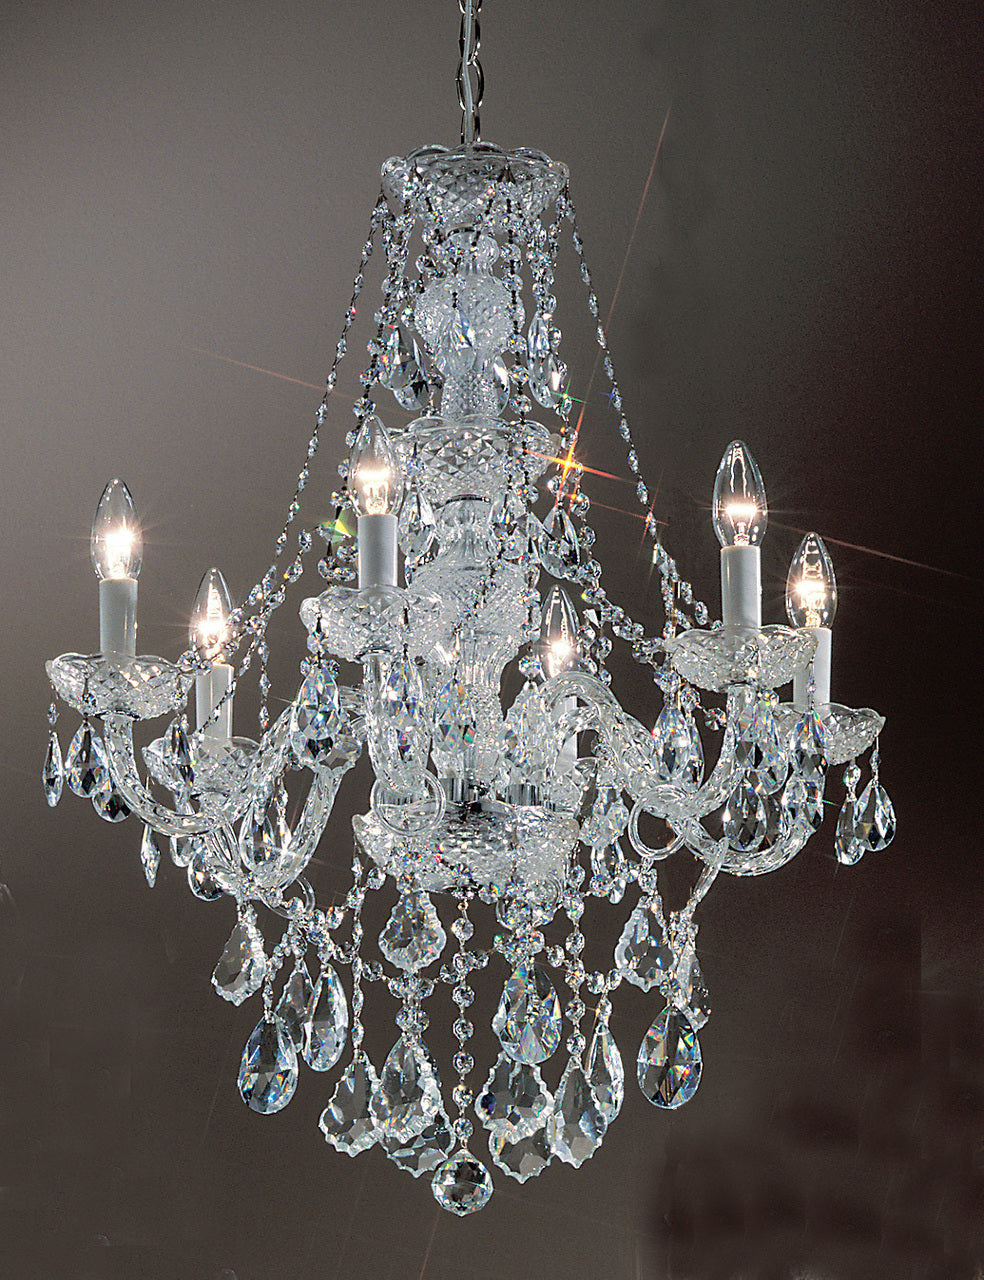 Classic Lighting 8256 CH SC Monticello Crystal/Glass Chandelier in Chrome